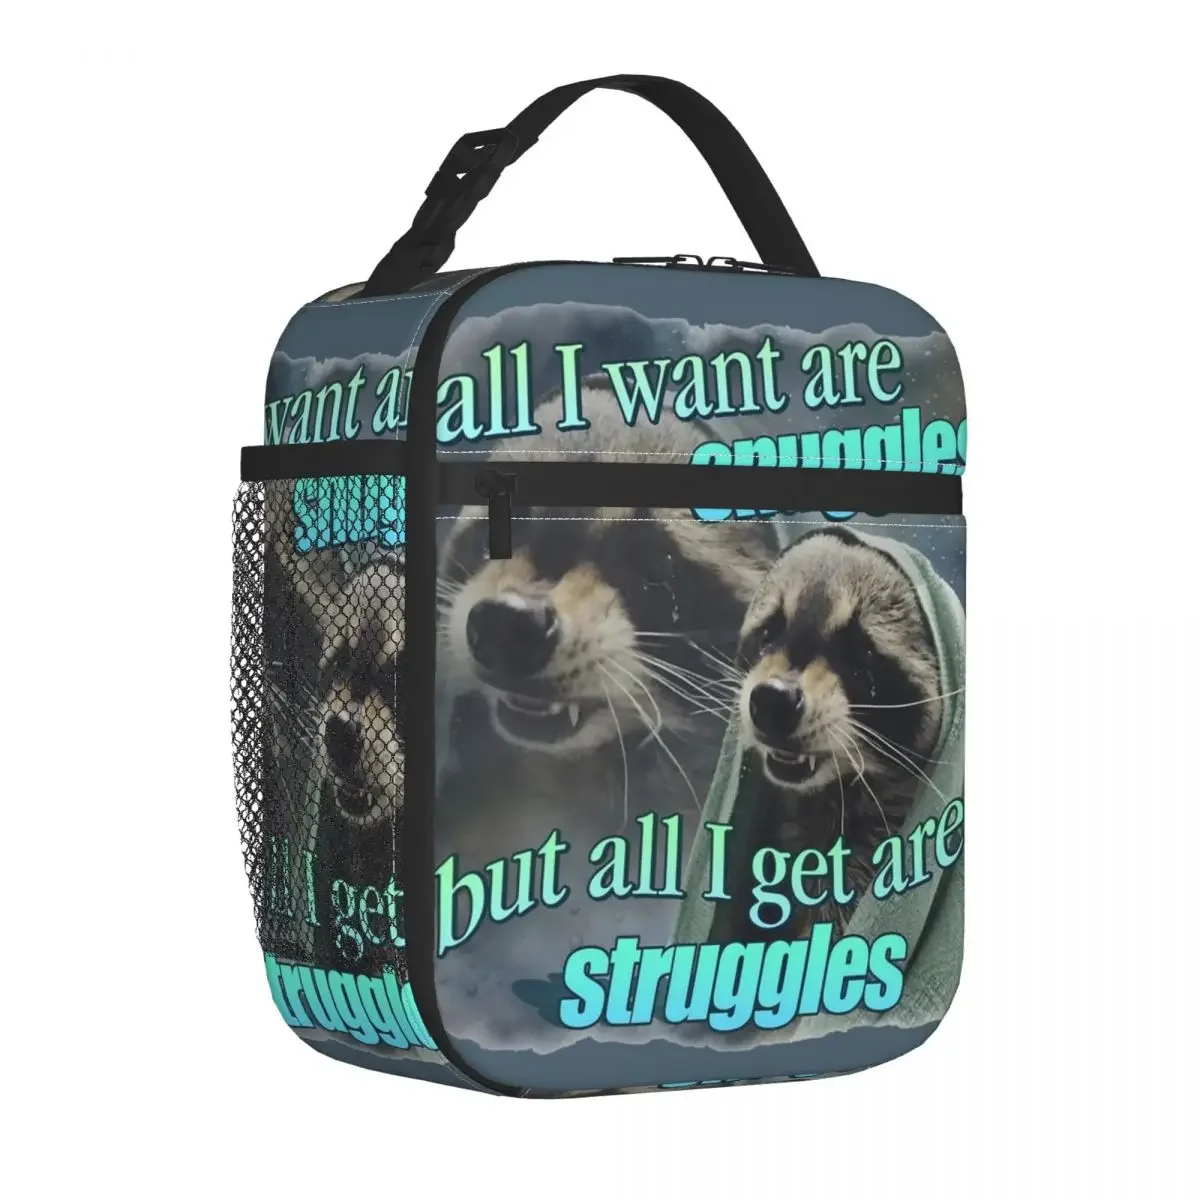 

Want Snuggles Get Struggles Raccoon Funny Meme Insulated Lunch Bag Large Cooler Bag Tote Lunch Box Beach Outdoor Bento Pouch